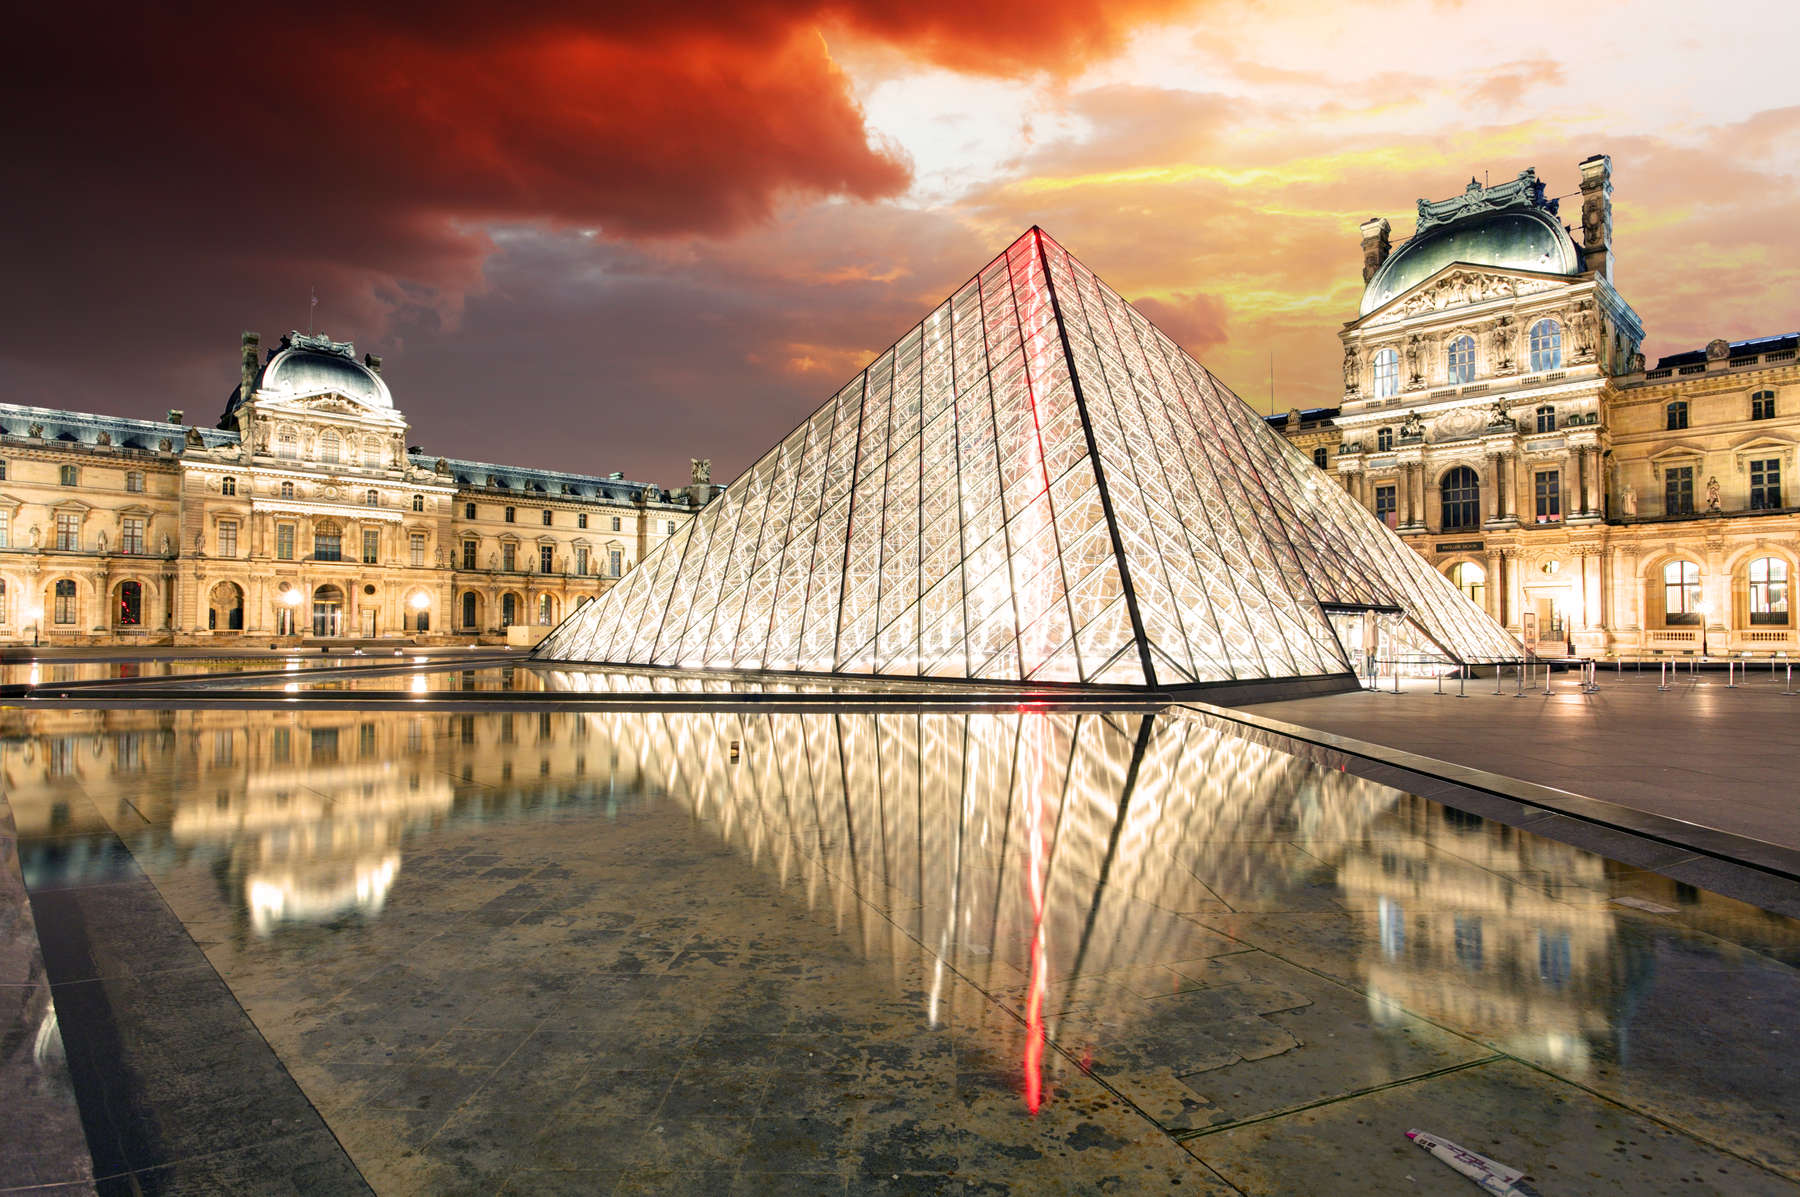 Paris - Louvre museum with pyramid, France